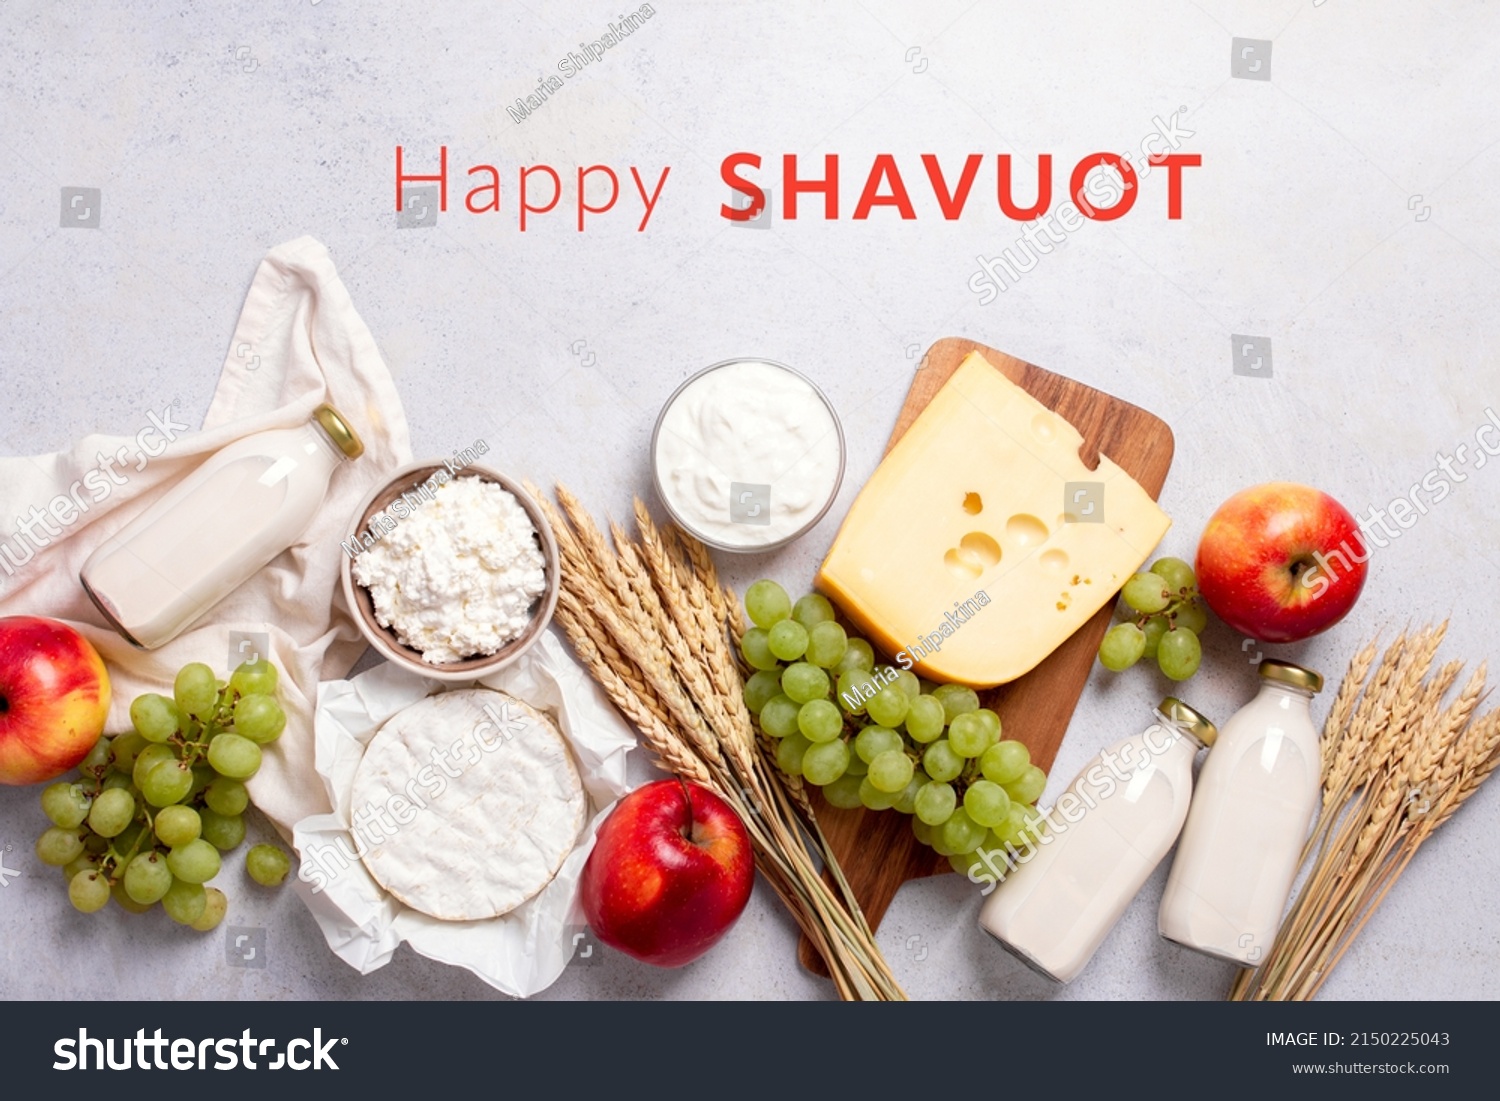 Shavuot flat lay with dairy products, first fruits and wheat on light gray background. Jewish Shavuot holiday frame with dairy foods and fruits and quote happy Shavuot, top view #2150225043